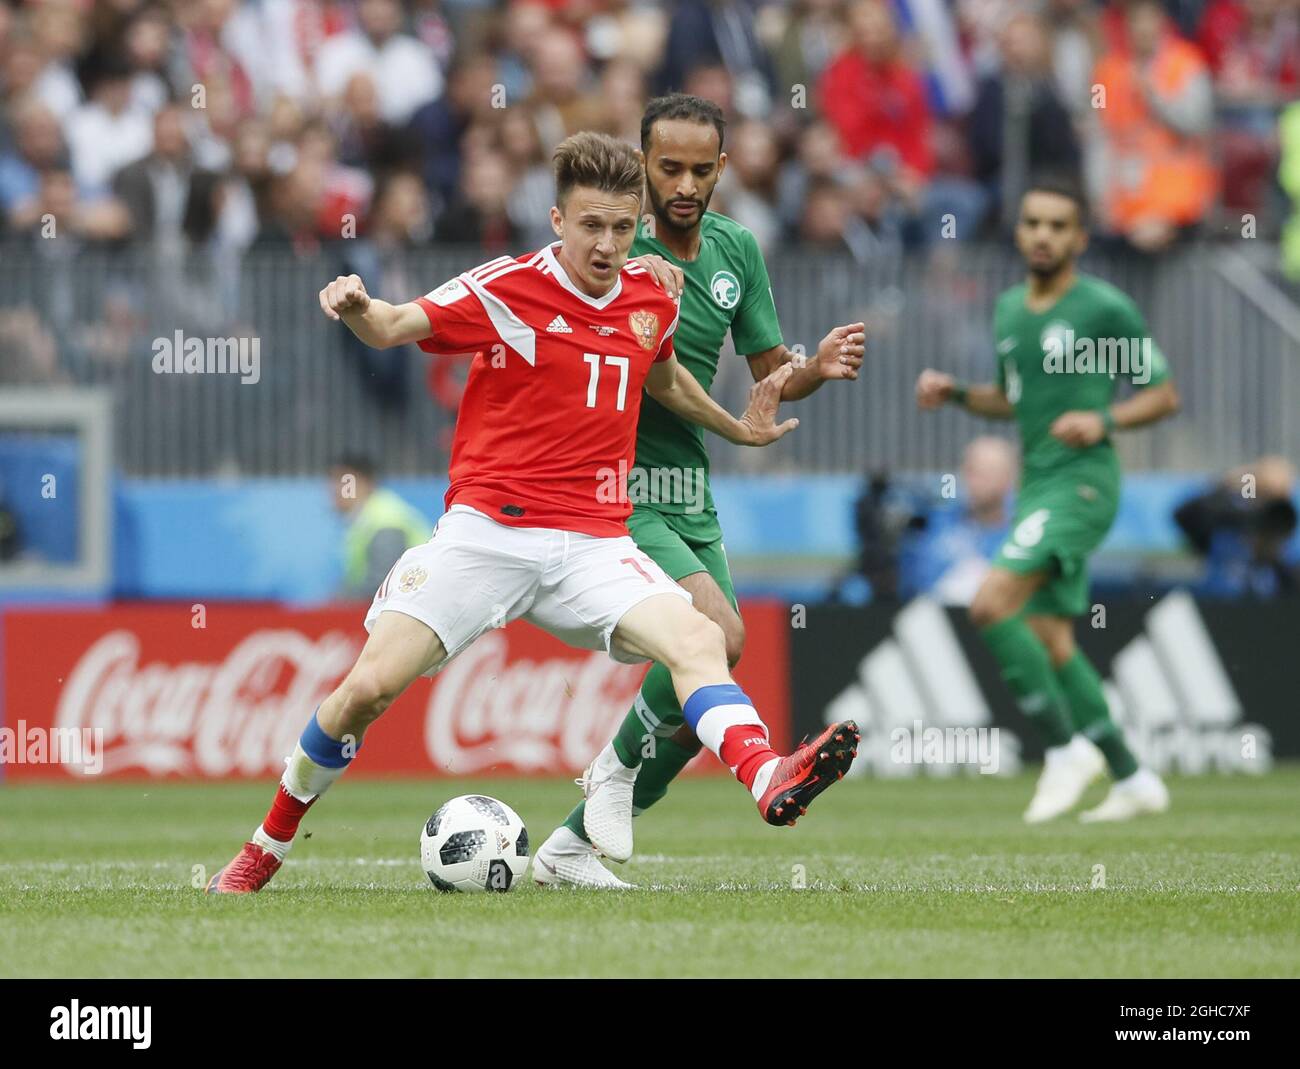 Aleksandr Samedov of Russia tackled by Alsahlawi Mohamed of Saudi Arabia during the FIFA World Cup 2018 Group A match at the Luzhniki Stadium, Moscow. Picture date 14th June 2018. Picture credit should read: David Klein/Sportimage via PA Images Stock Photo